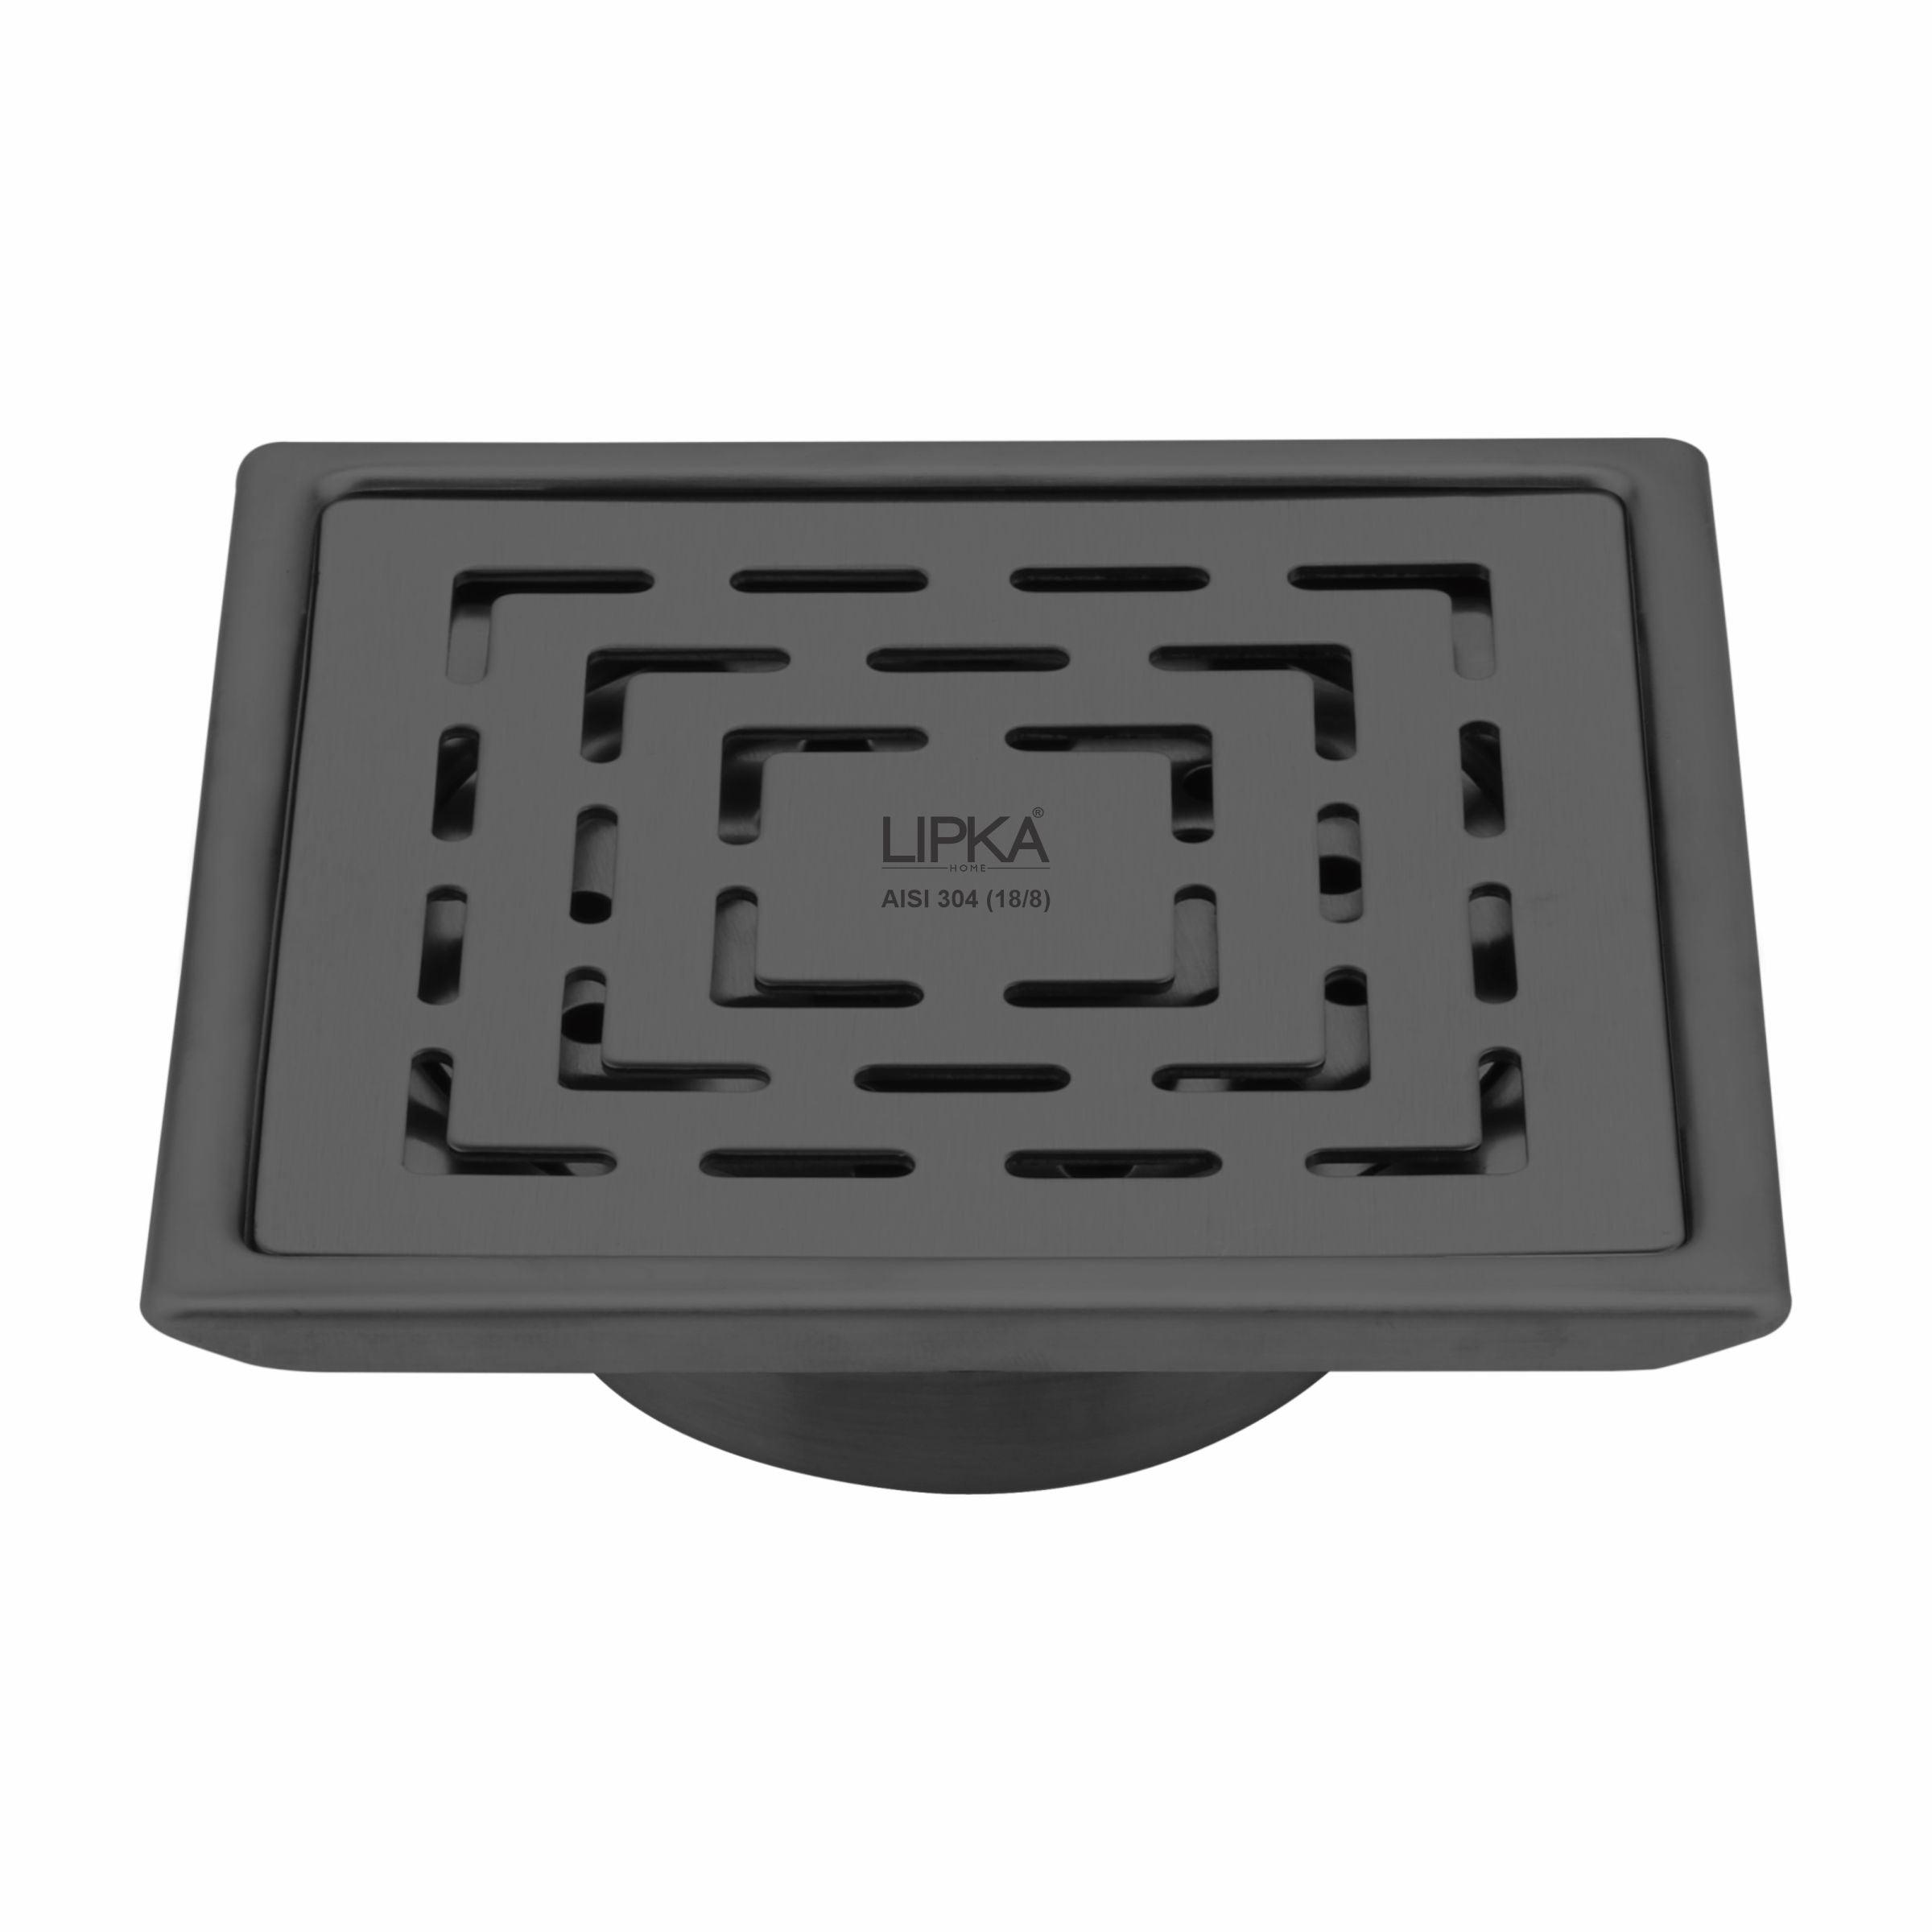 Orange Exclusive Square Flat Cut Floor Drain in Black PVD Coating (6 x 6 Inches) with Hole & Cockroach Trap 